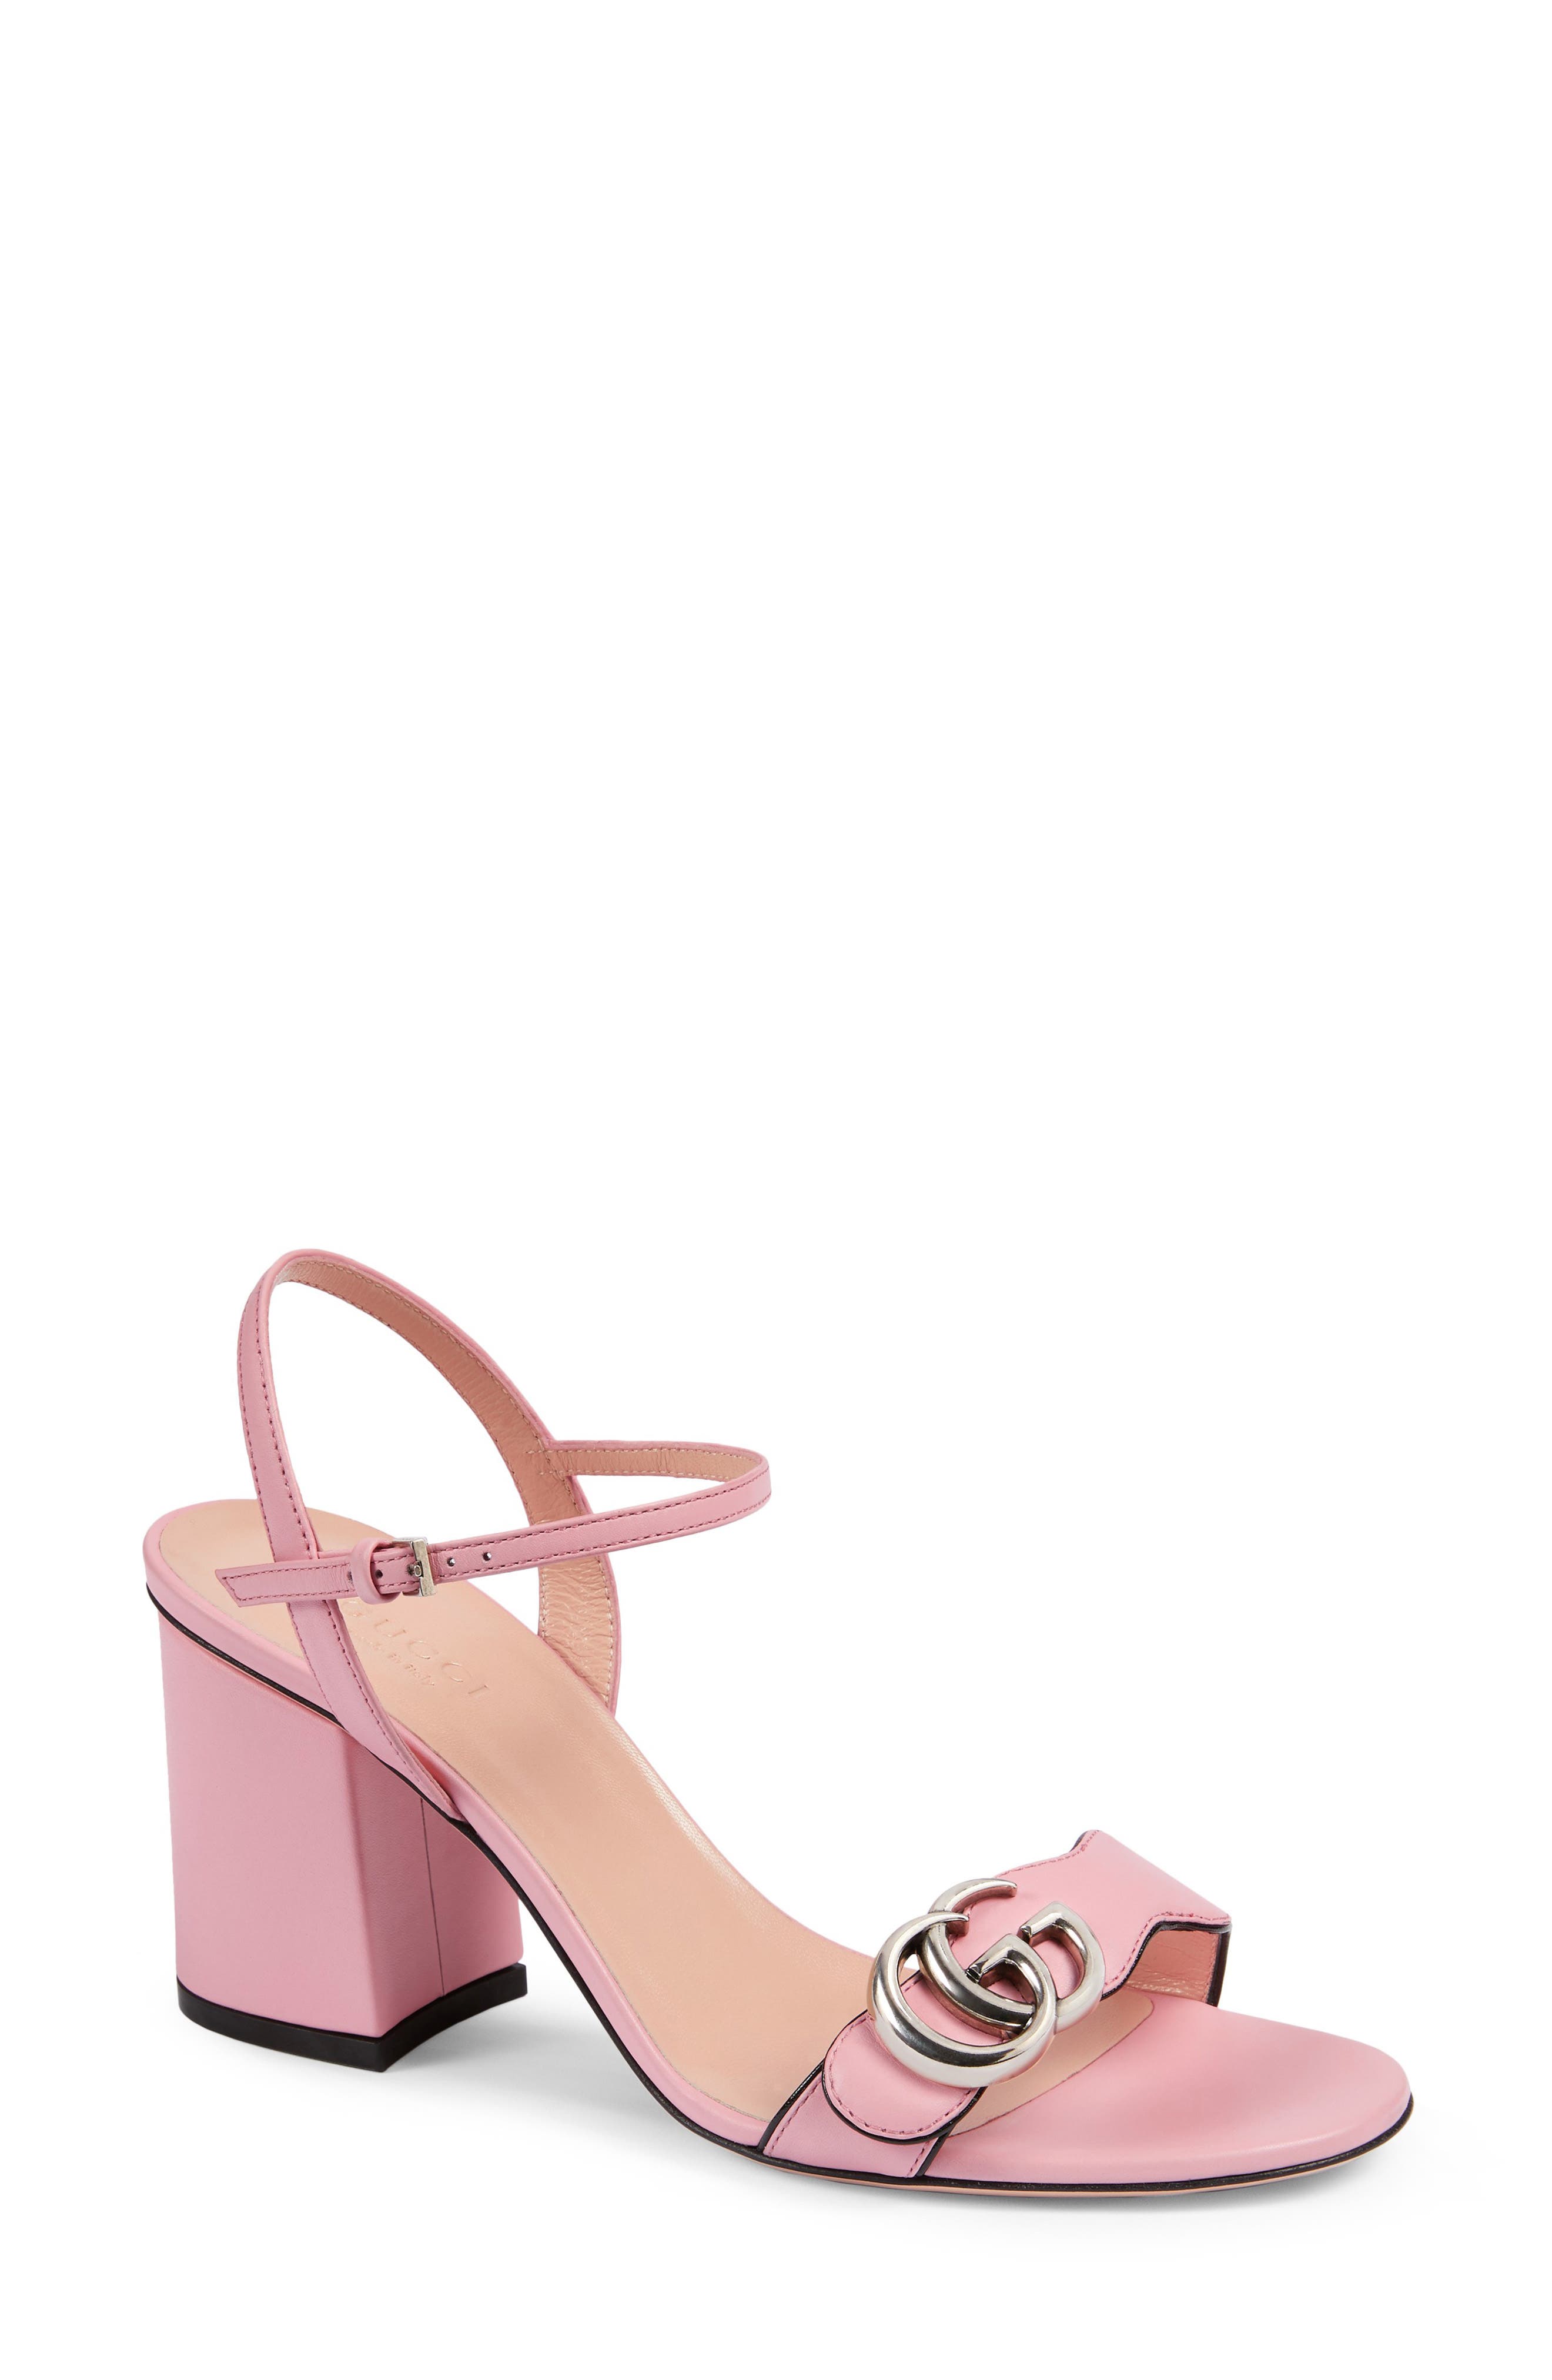 Women's Pink Gucci Shoes | Nordstrom